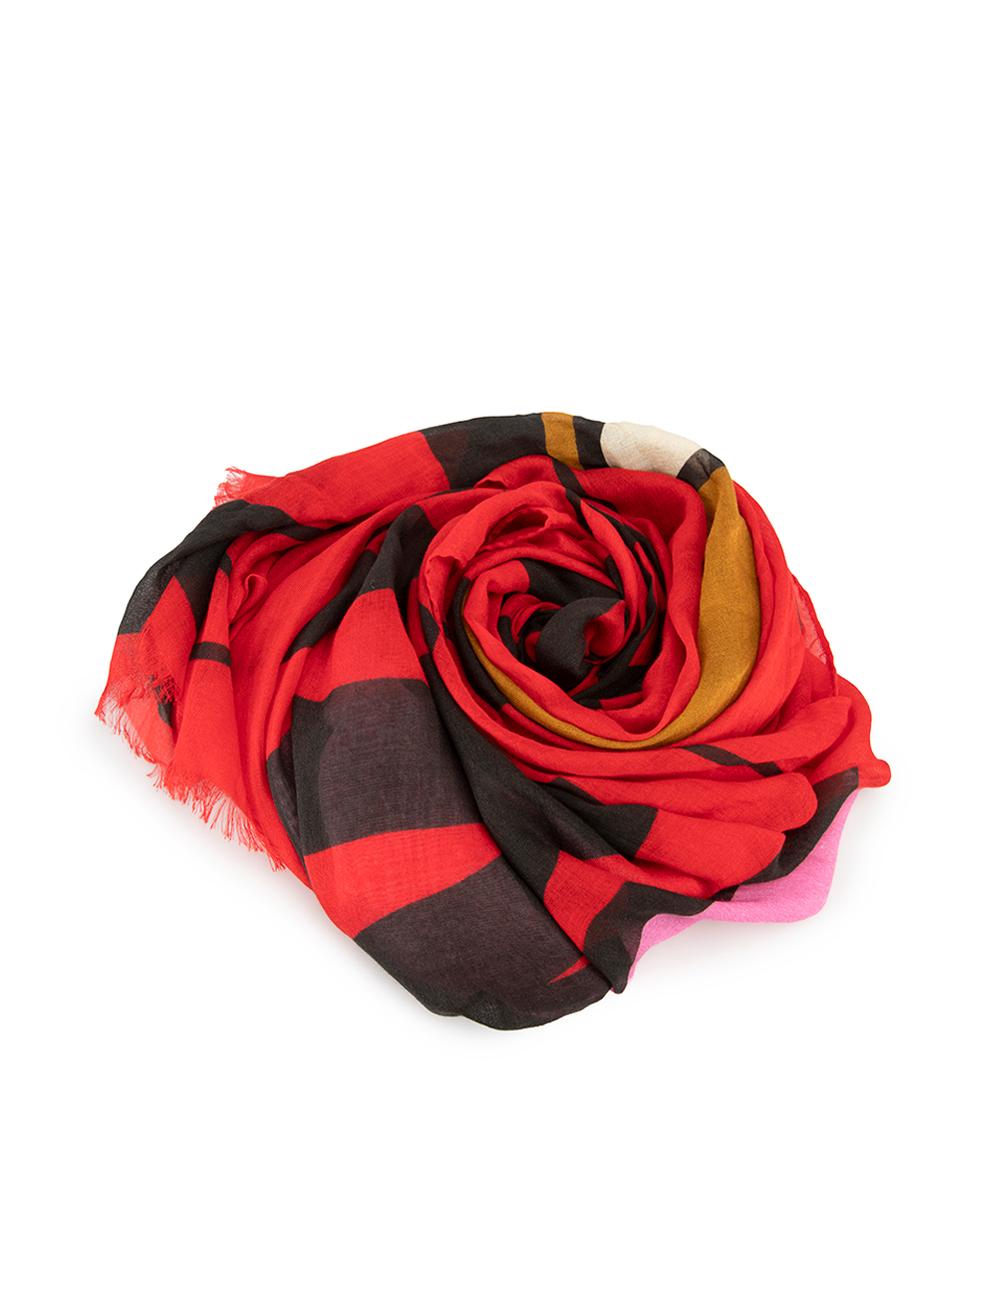 CONDITION is Never worn, with tags. Very minor visible wear to scarf where fabric has pulled as a result of storage and two small holes is evident on this new Moschino designer resale item.



Details


Red

Modal

Rectangle scarf

Brand logo